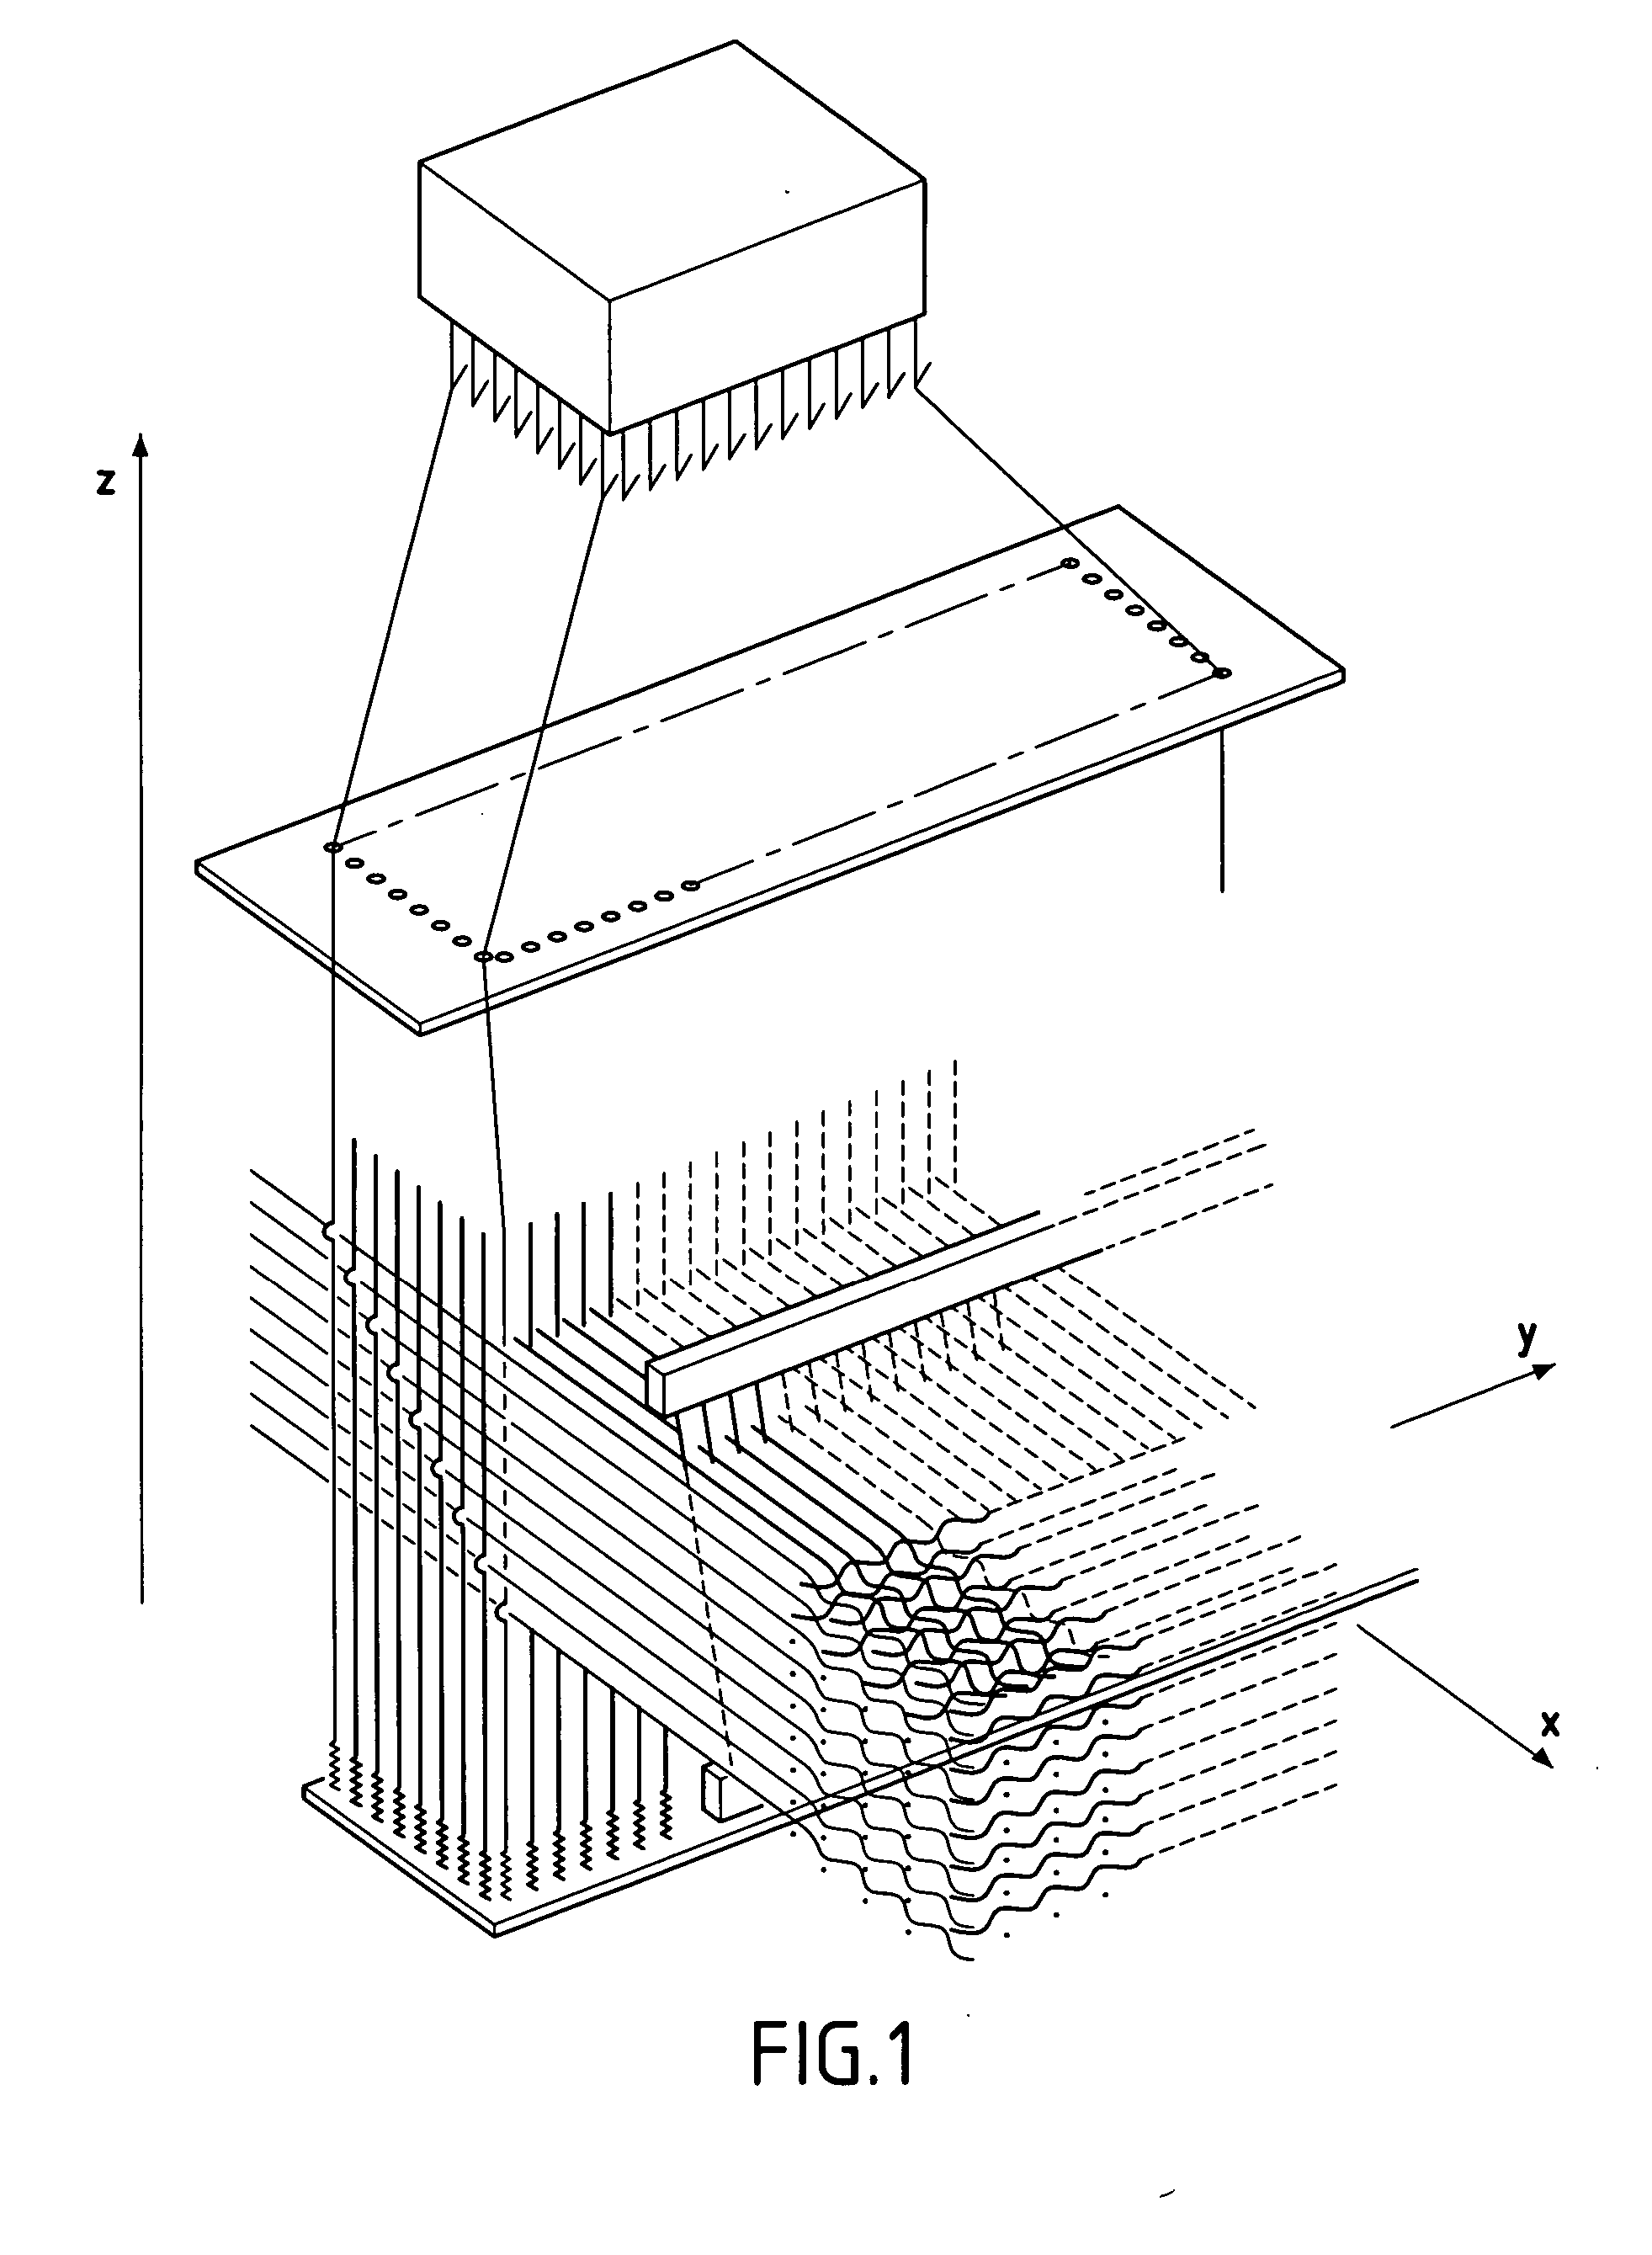 Turbomachine blade, in particular a fan blade, and its method of manufacture